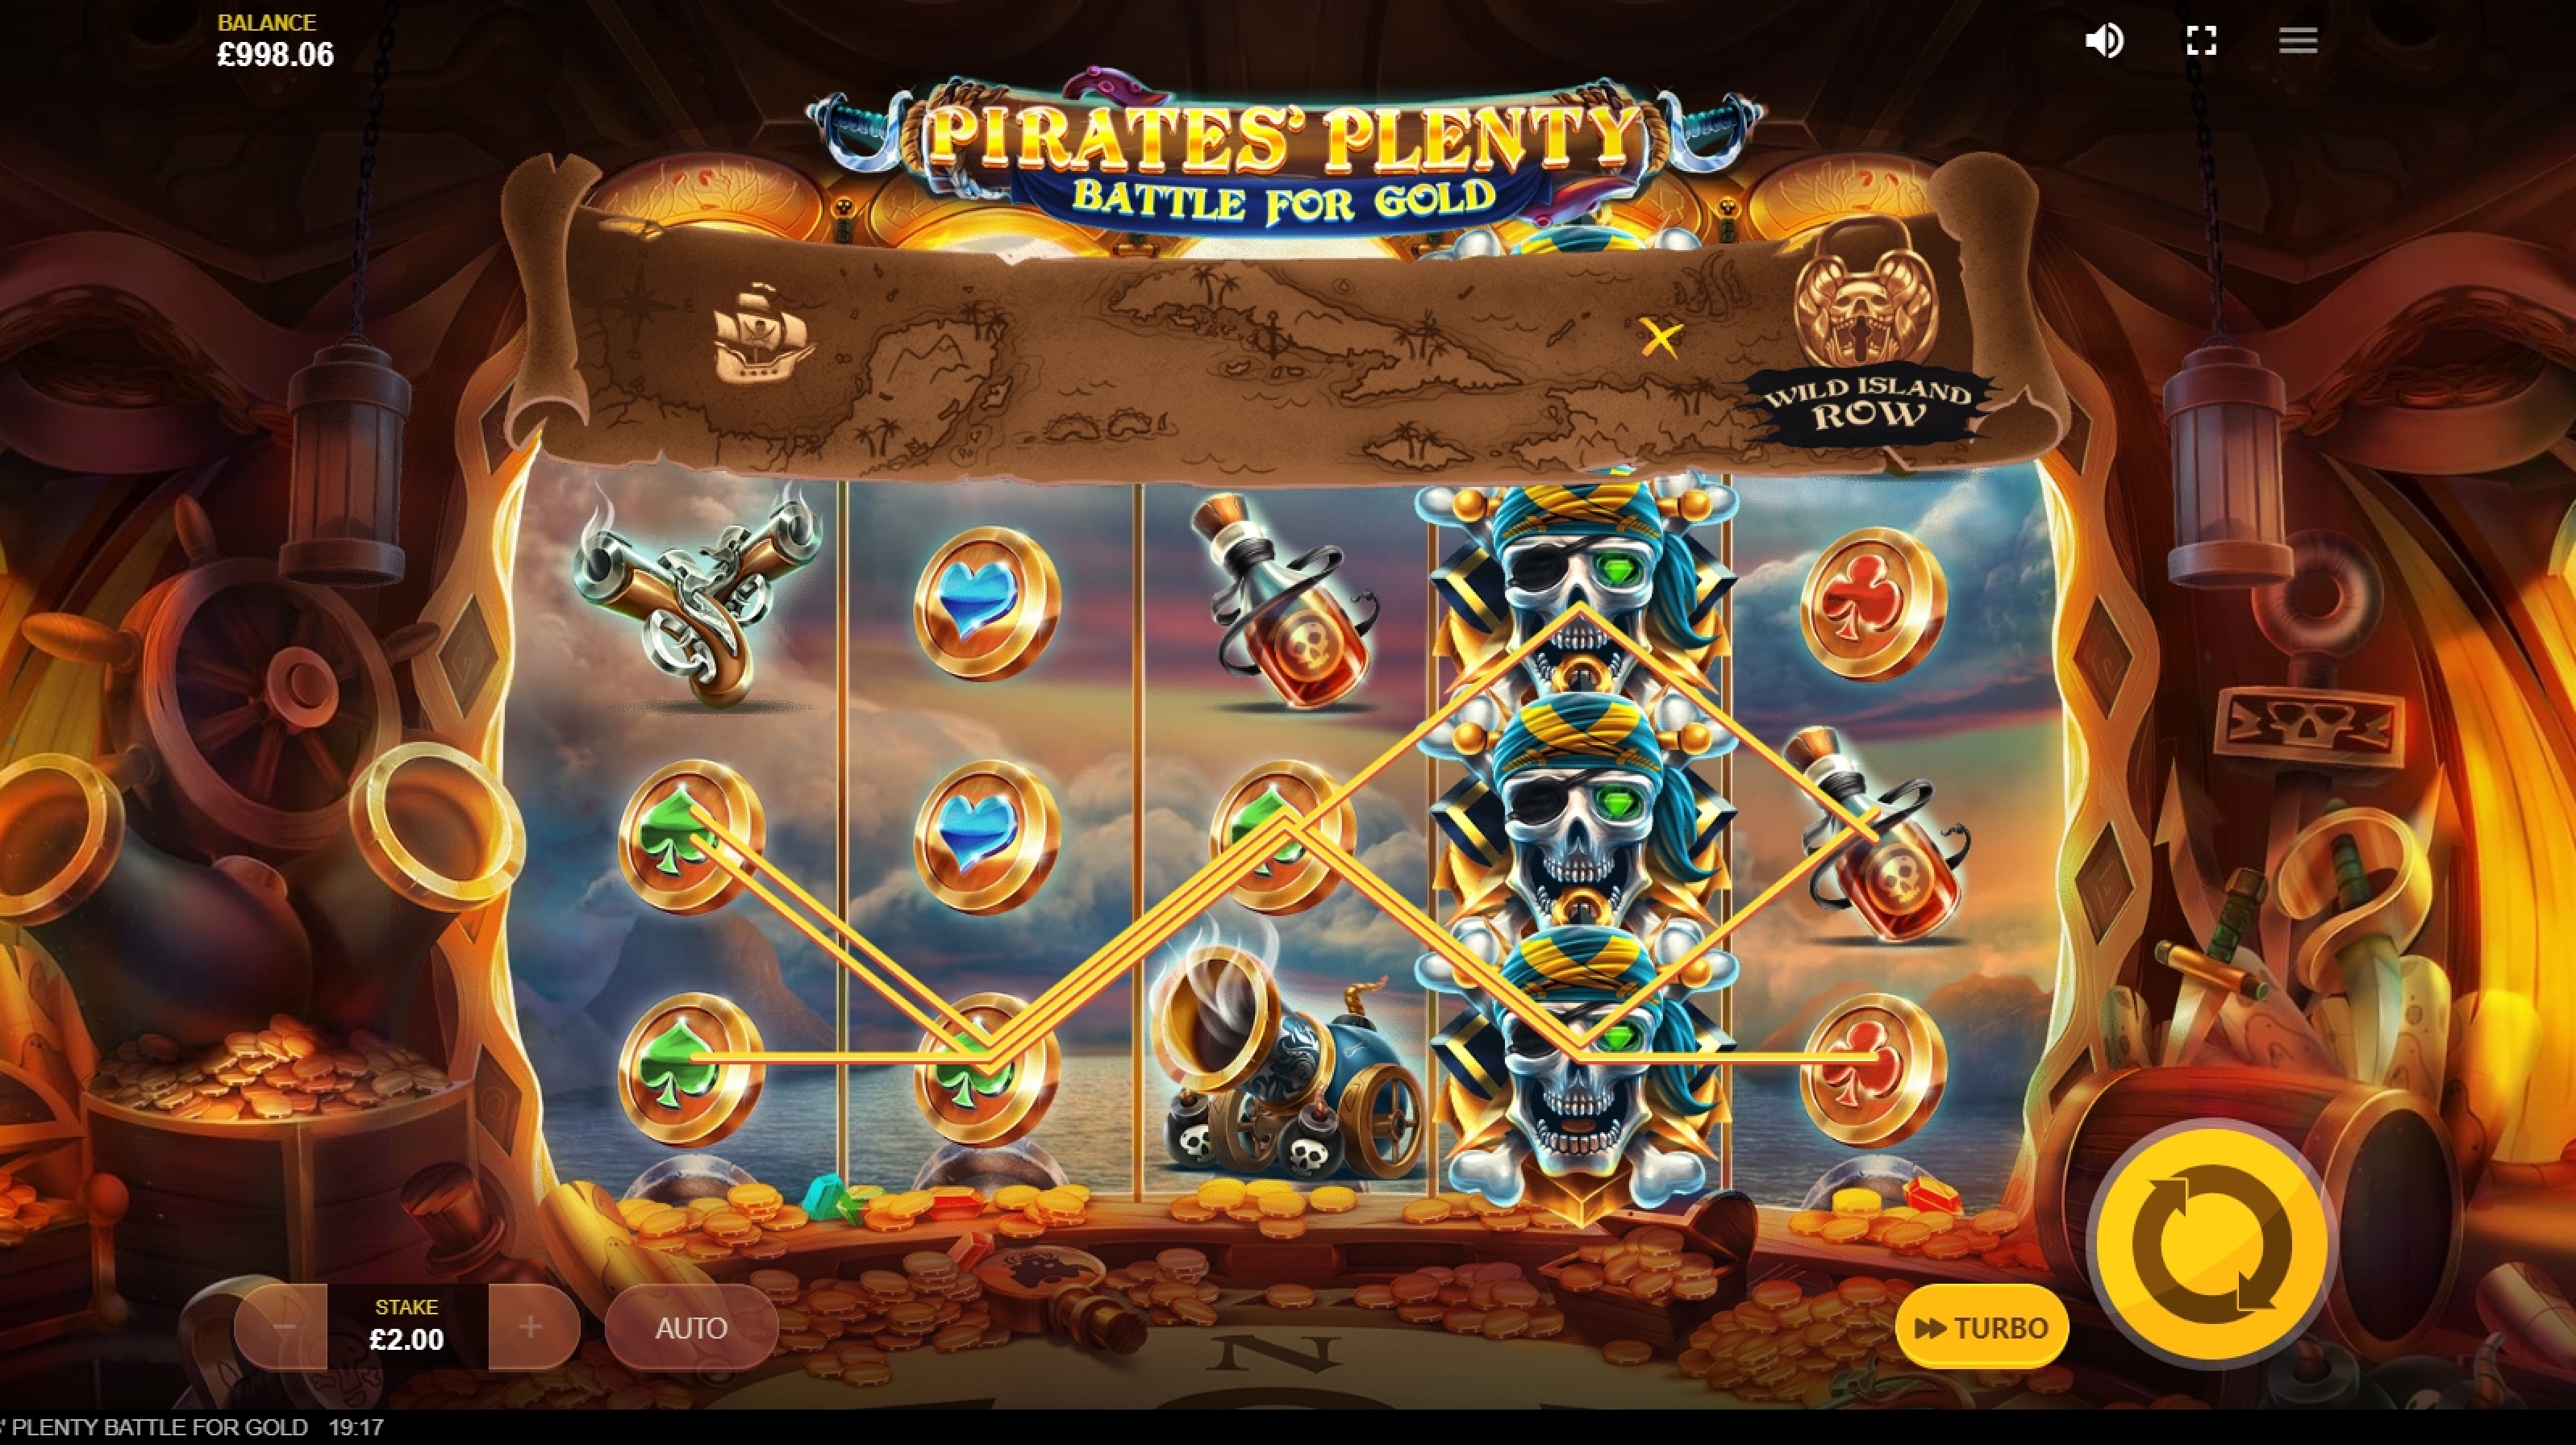 Win Money in Pirates Plenty Battle for Gold Free Slot Game by Red Tiger Gaming